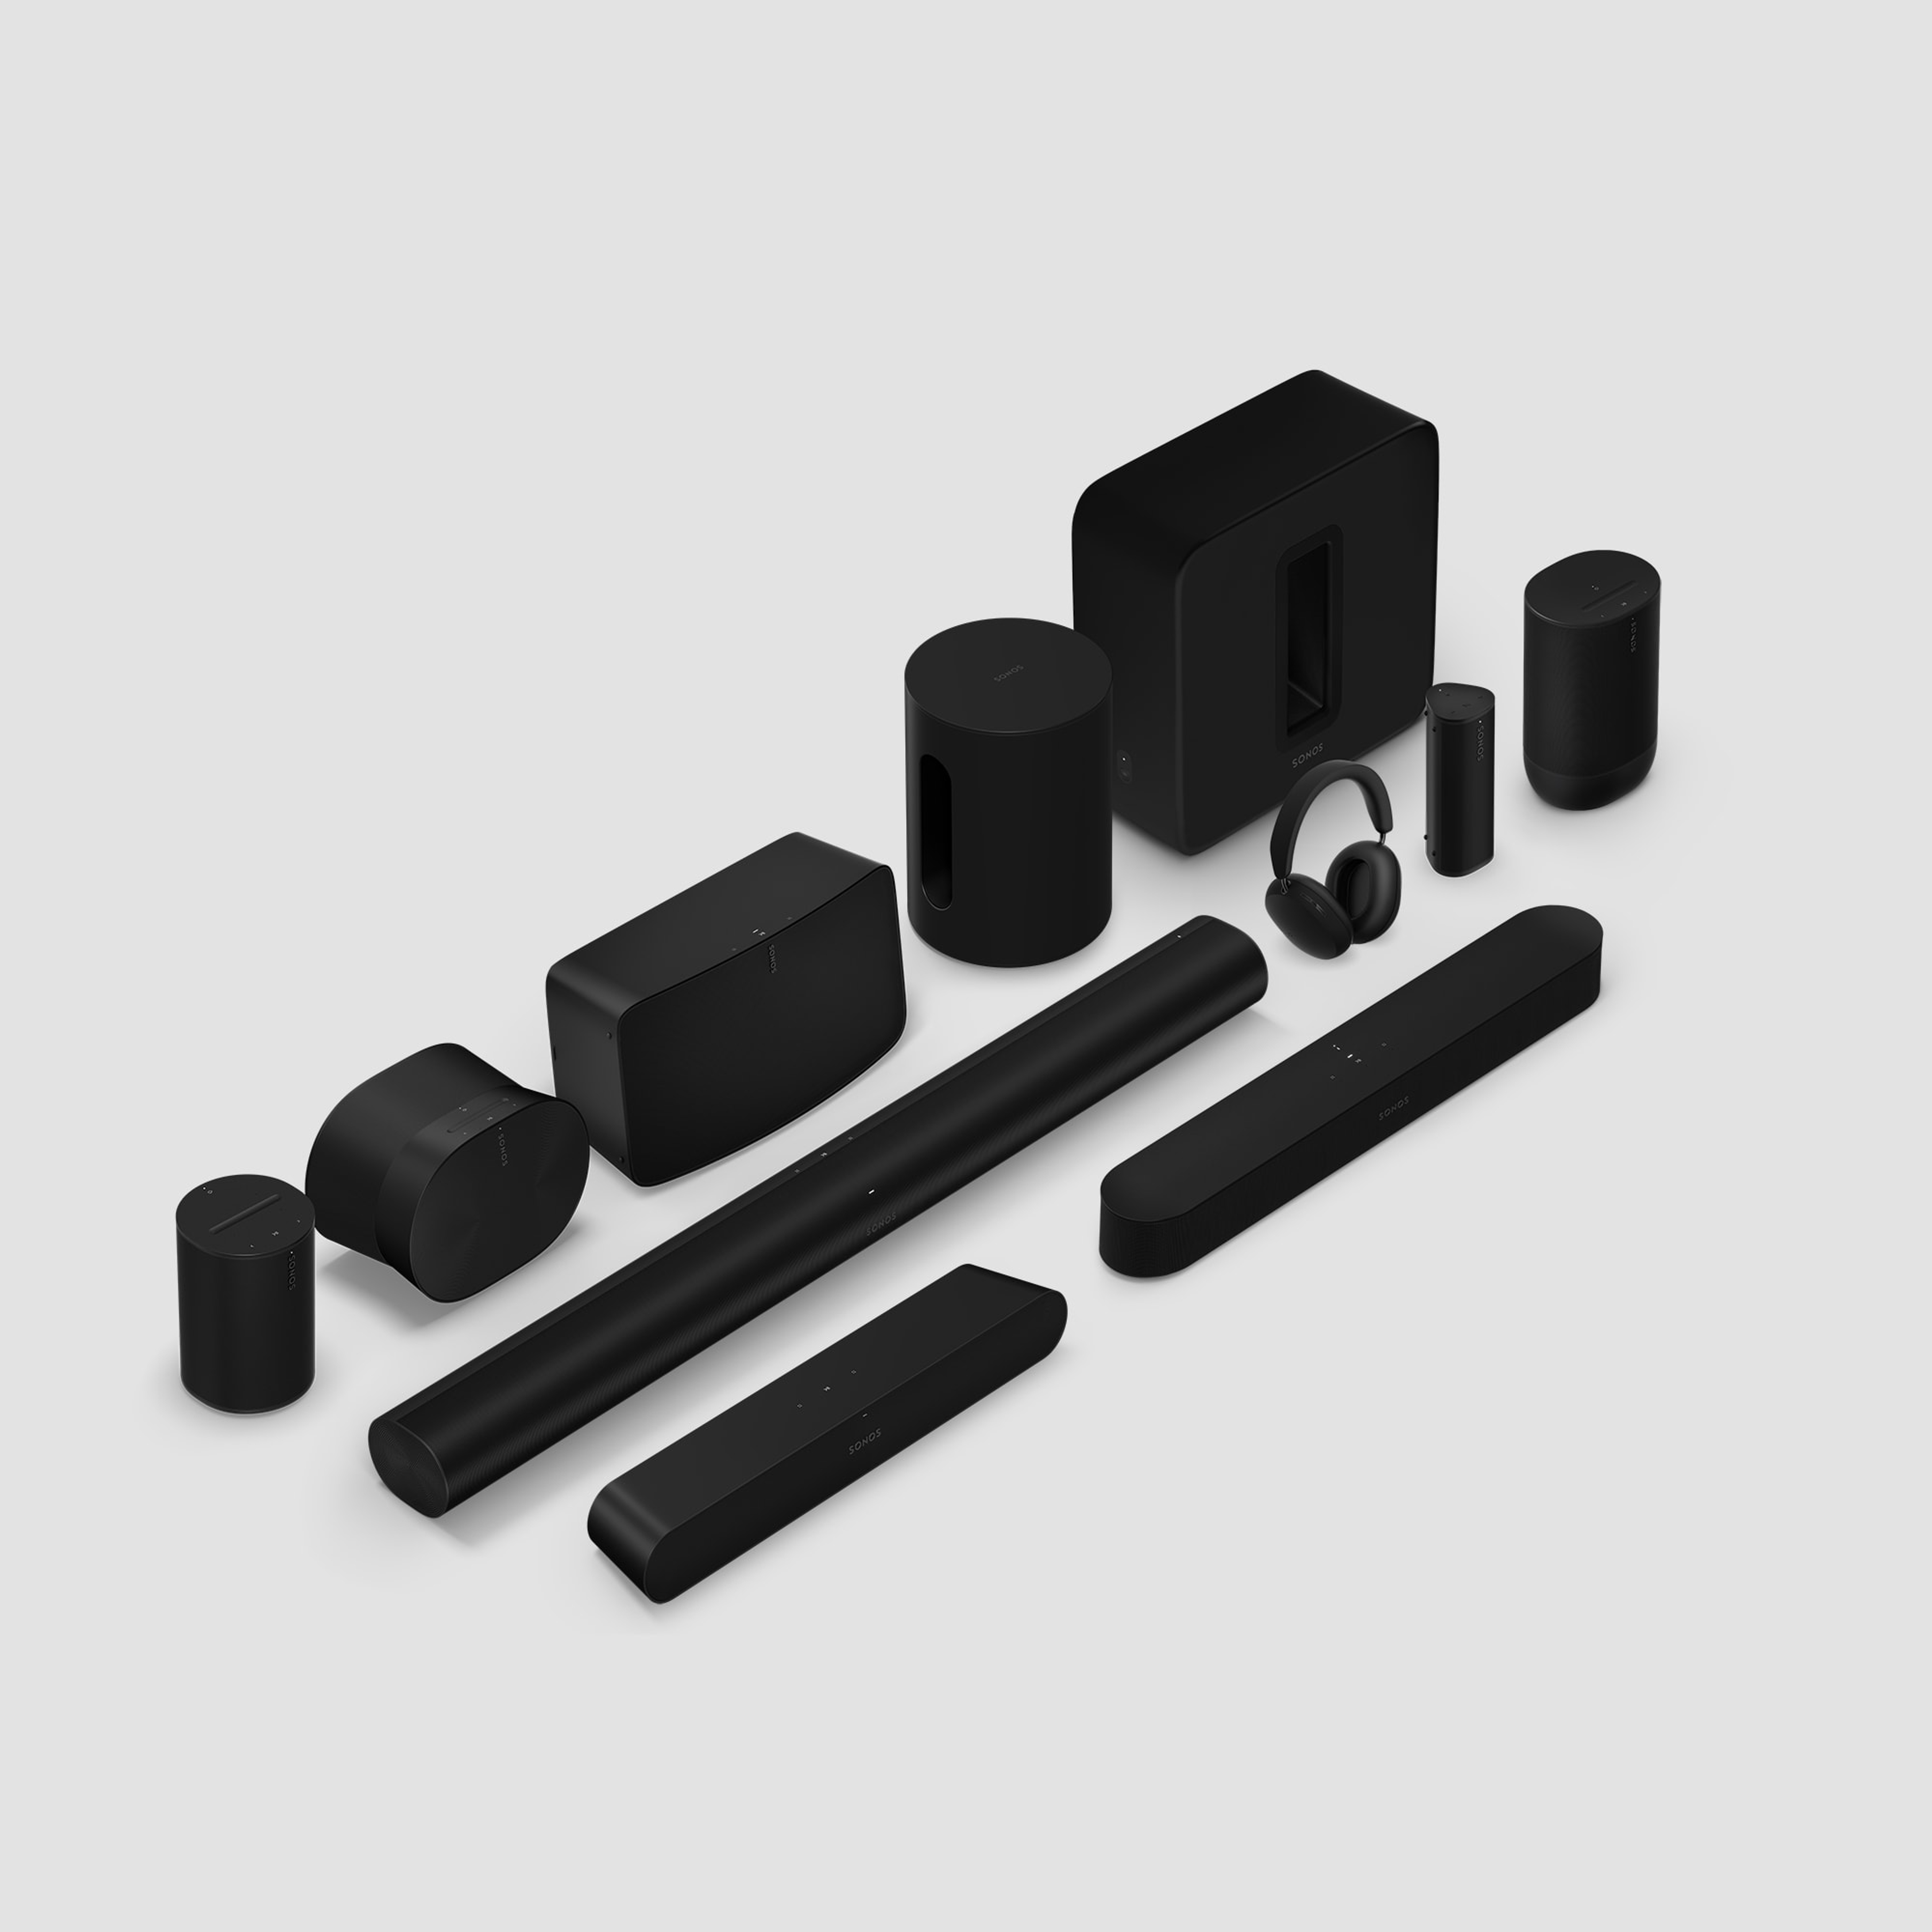 Sonos product family in black